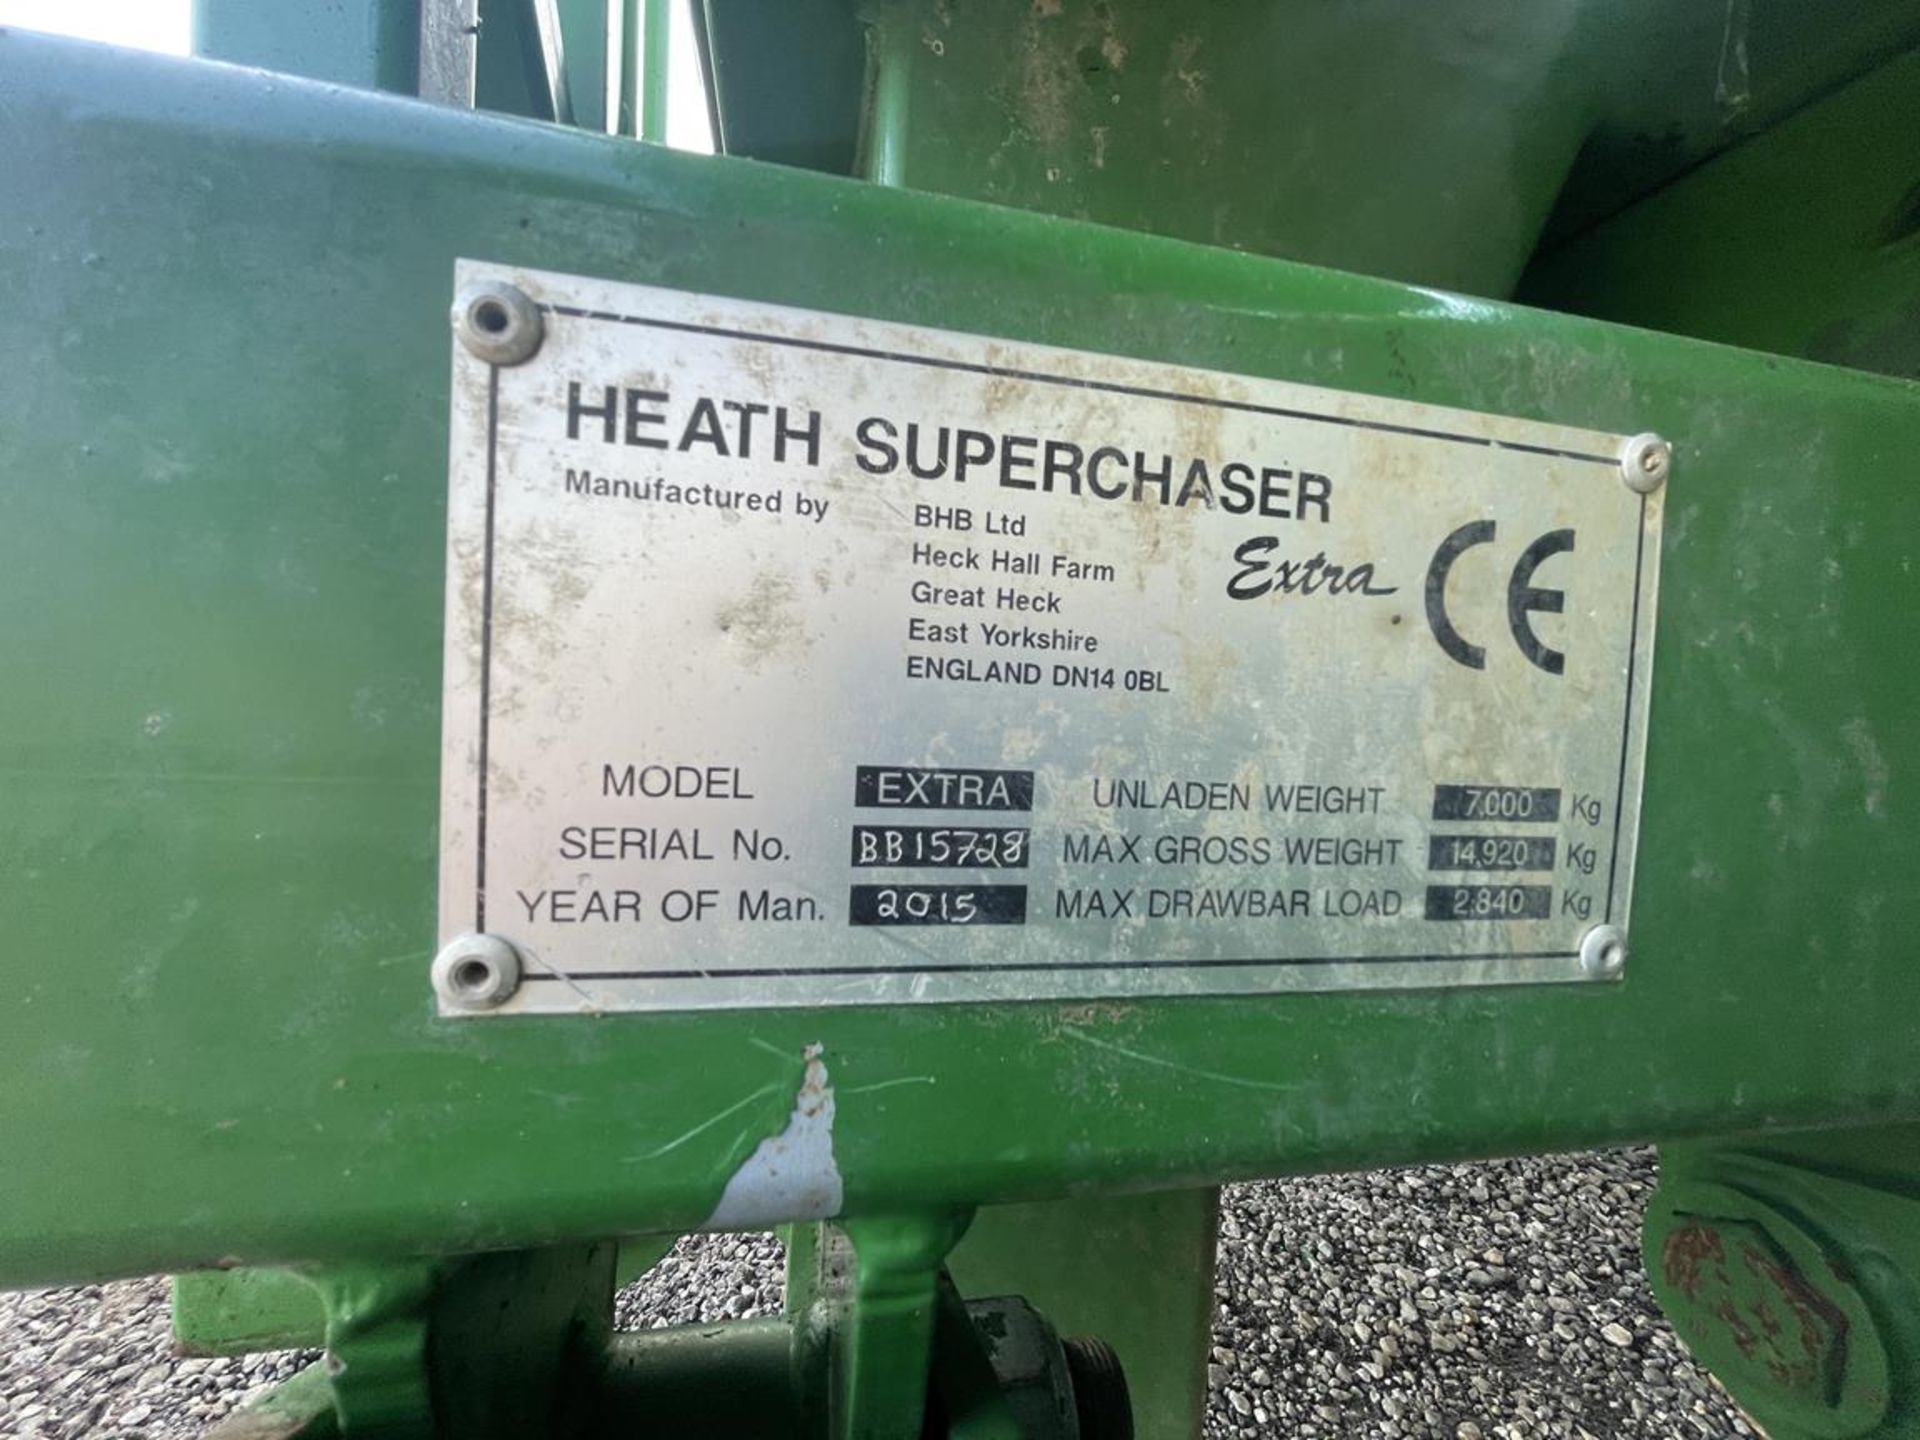 2015 Heath Superchaser Model Super Extra Bale Chaser, Double Axle Trailer S/No. BB15728, Air Brakes, - Image 9 of 9